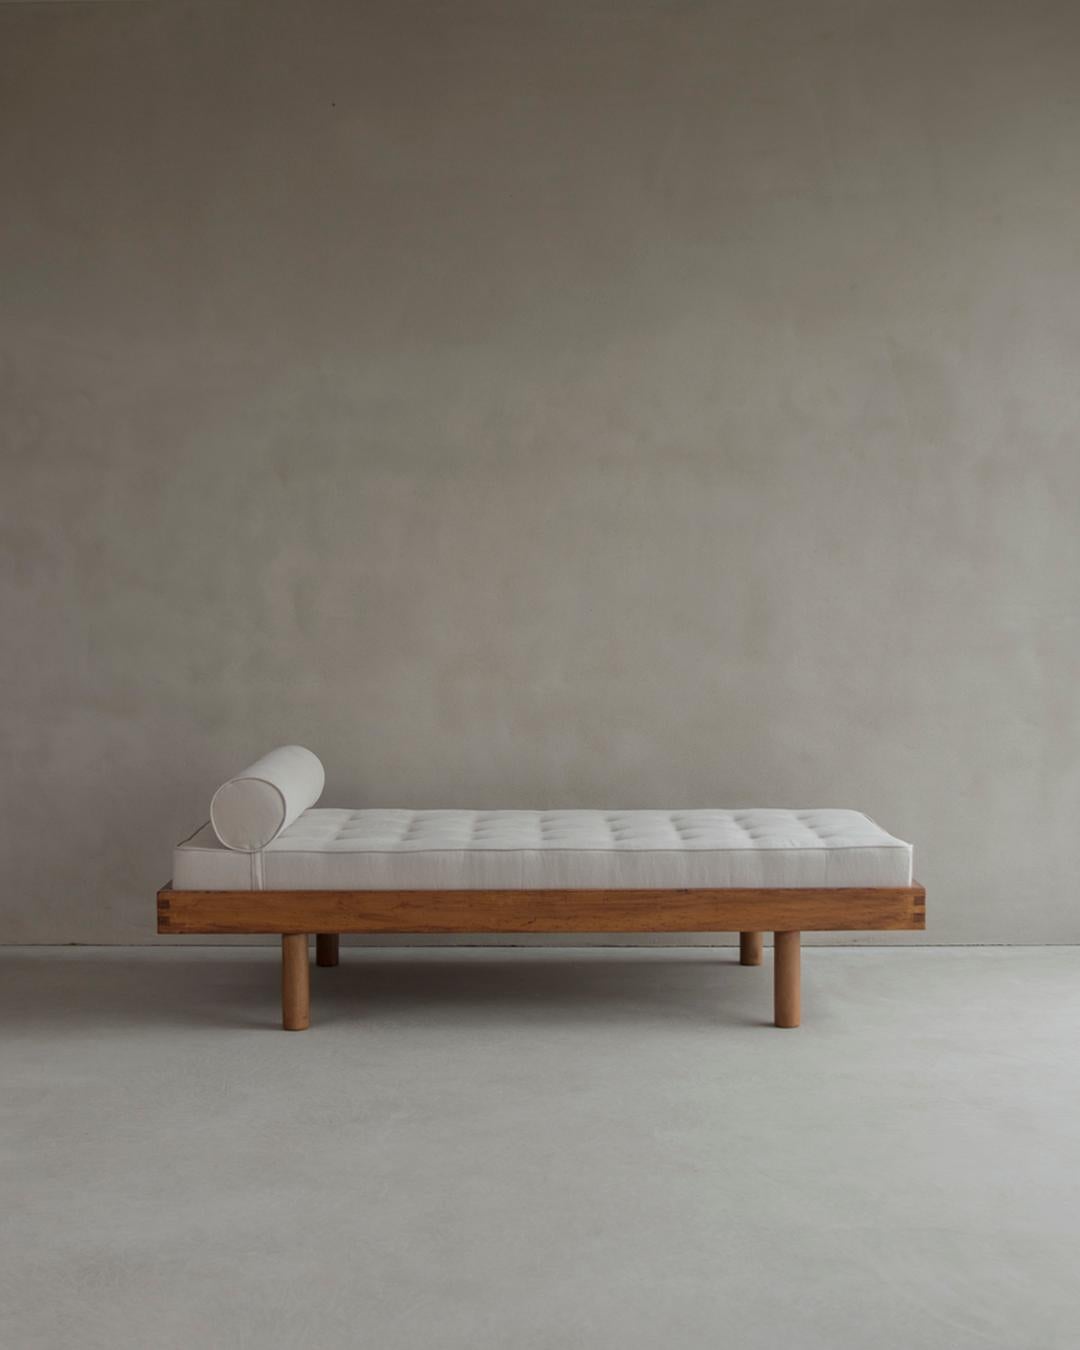 This daybed was designed by Charlotte Perriand, renowned French architect and designer, who drew it to furnish the ski resort Les Arcs 1800 in the 1970s. It is derived from a bed she designed with Le Corbusier for the Maison du Brésil in 1959. The